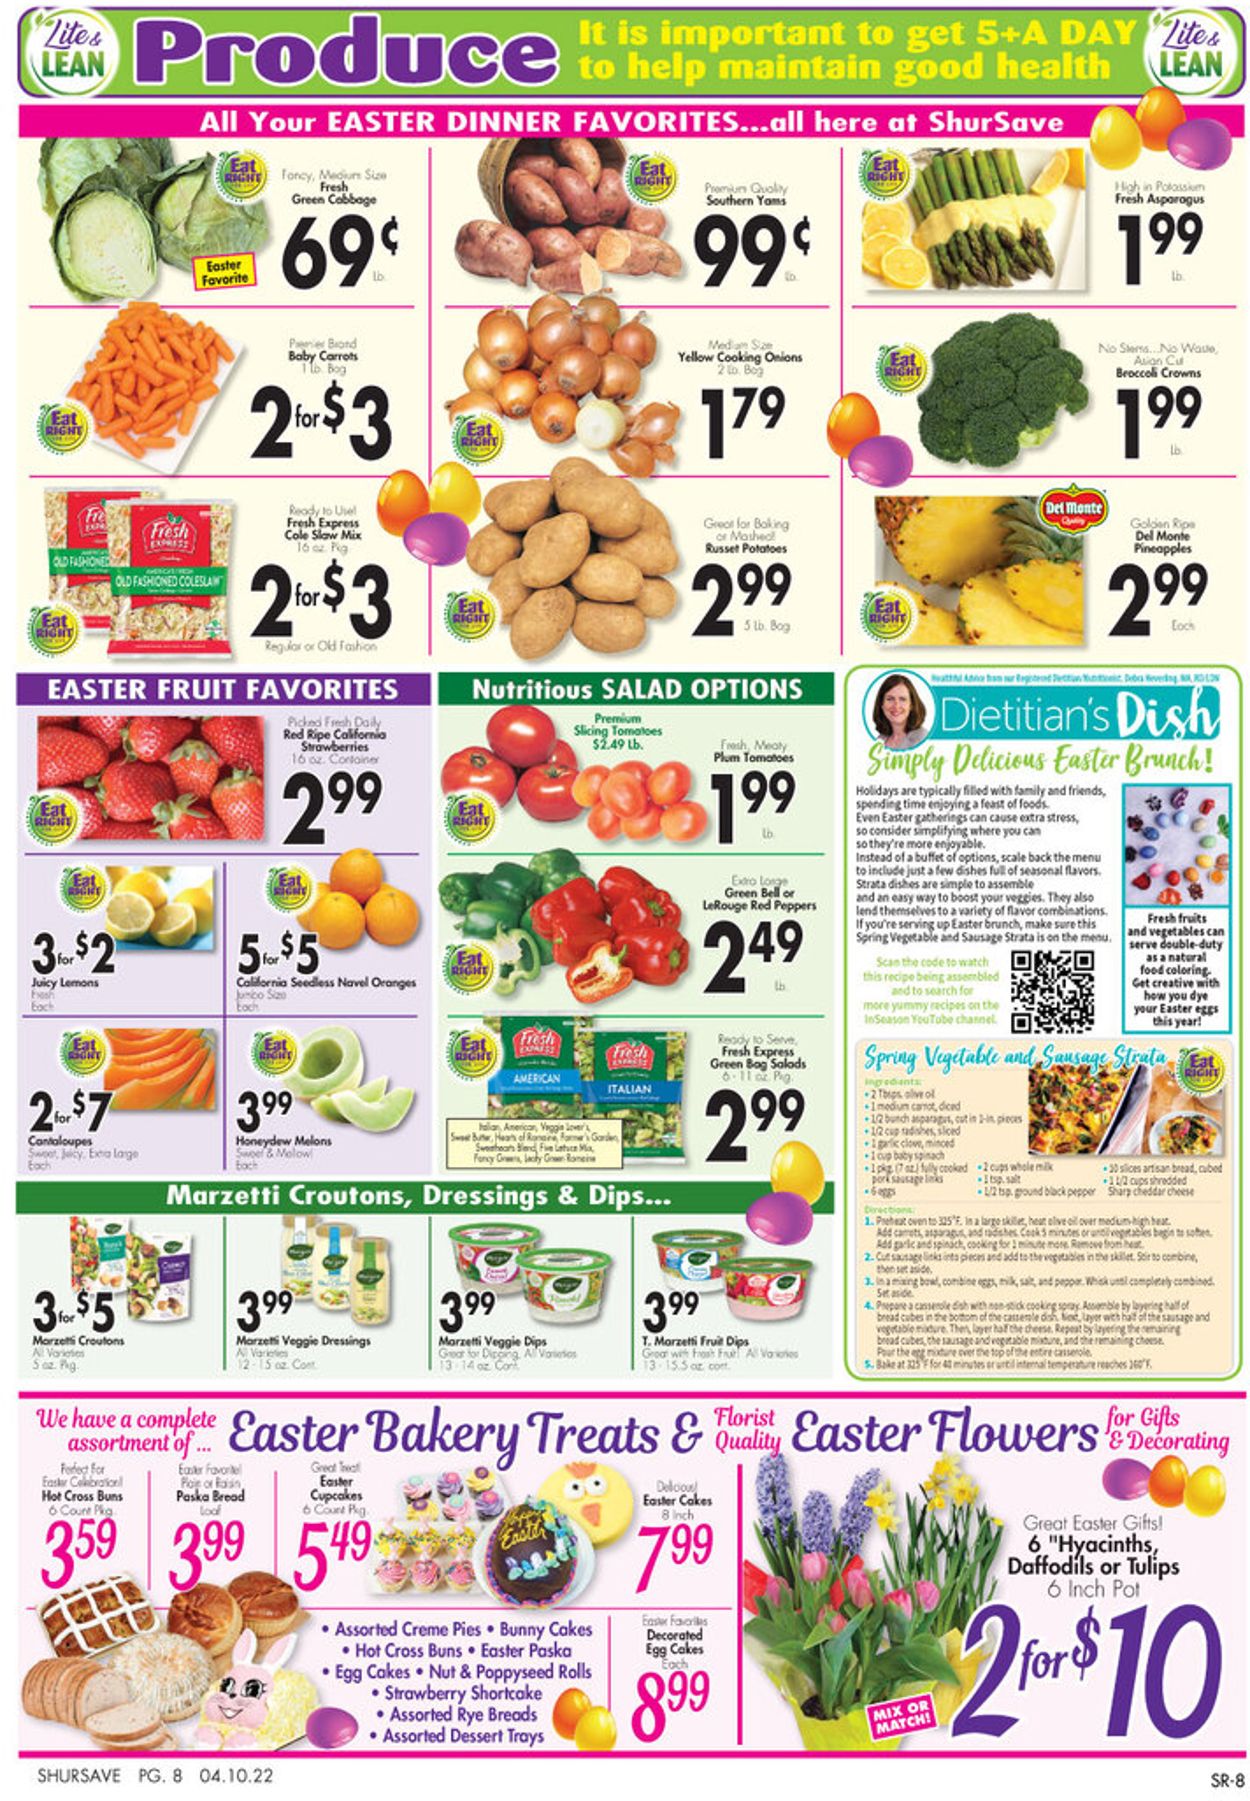 Gerrity's Supermarkets EASTER 2022 Weekly Ad Circular - valid 04/10-04/16/2022 (Page 9)